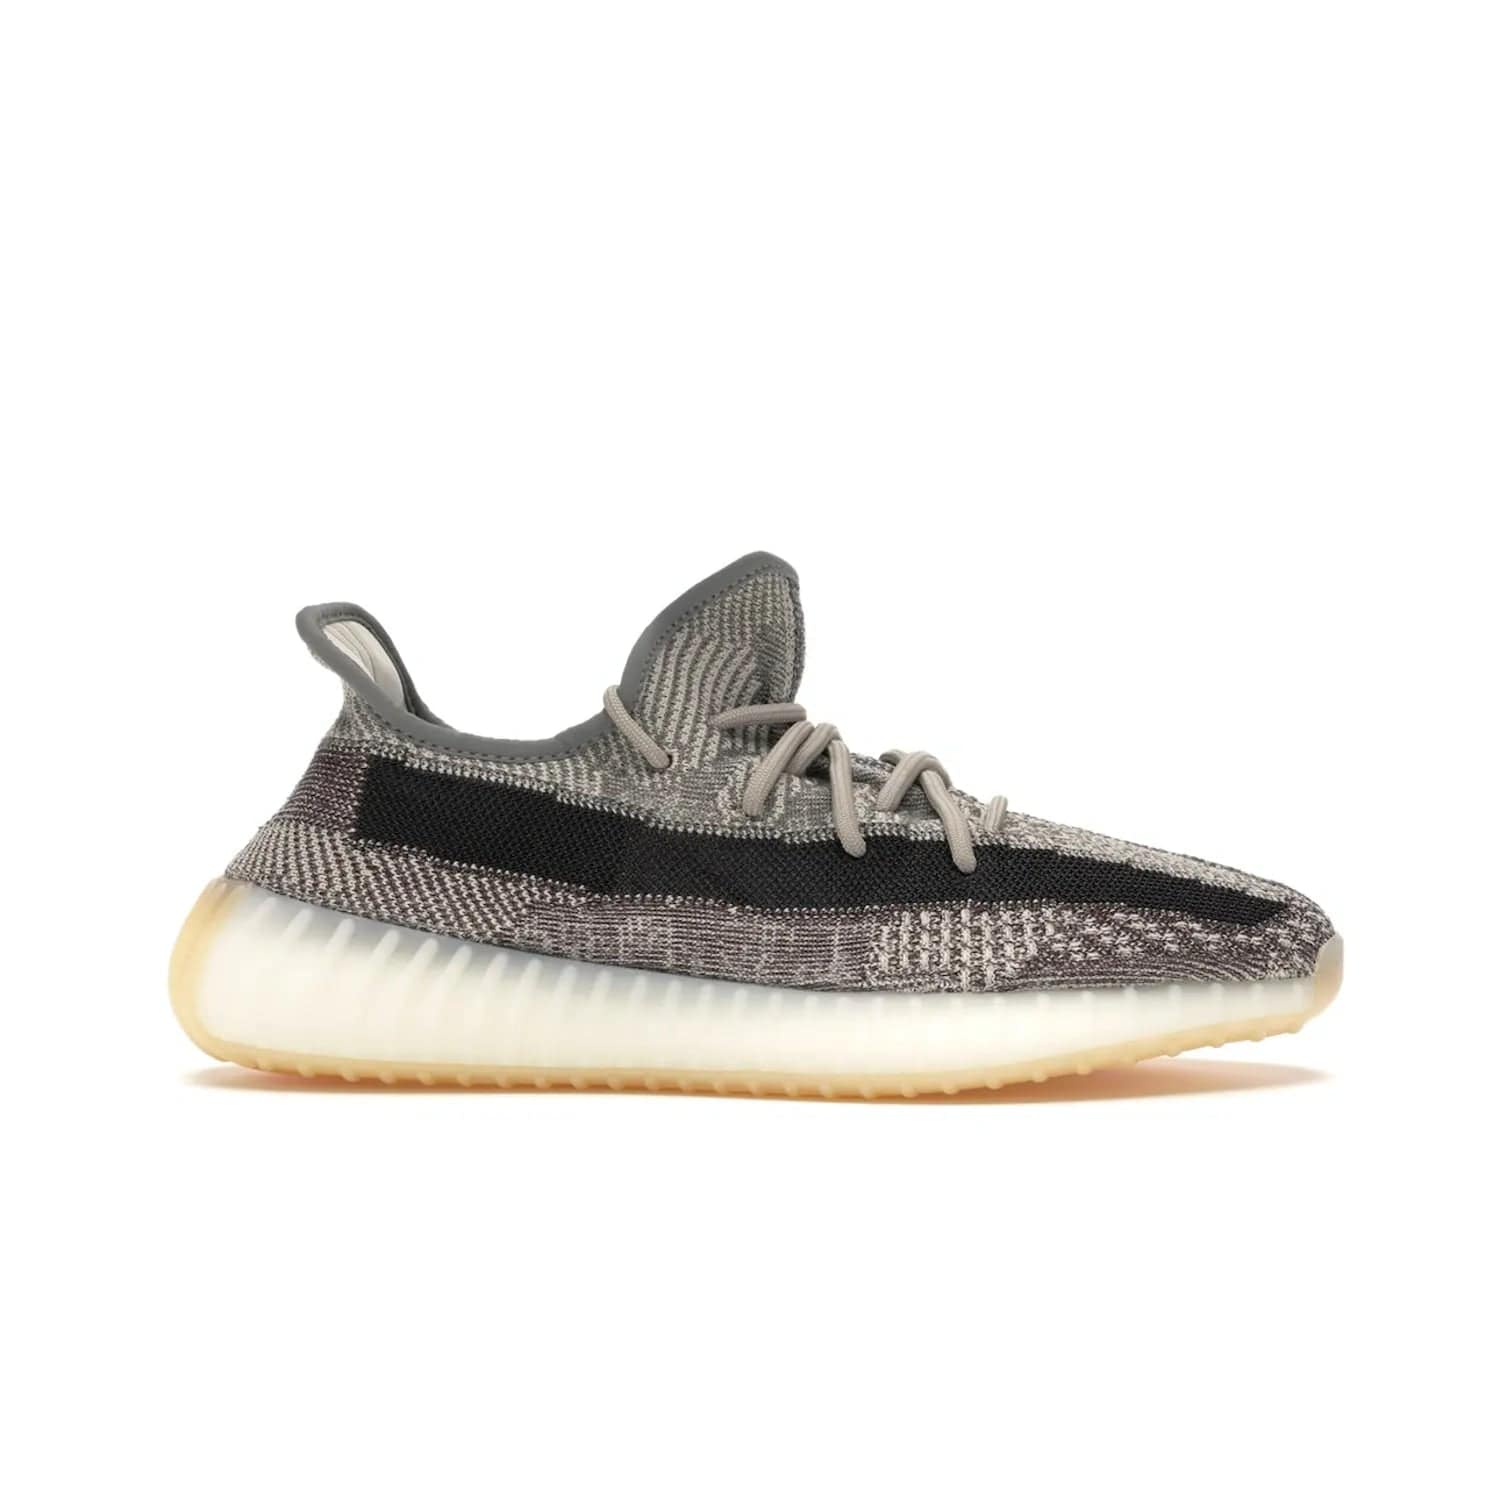 adidas Yeezy Boost 350 V2 Zyon - Image 1 - Only at www.BallersClubKickz.com - Step up your style game with the adidas Yeezy Boost 350 V2 Zyon. This sleek sneaker features a Primeknit upper, dark side stripe, translucent Boost sole, and creamy white interior providing style and comfort. Get them now!